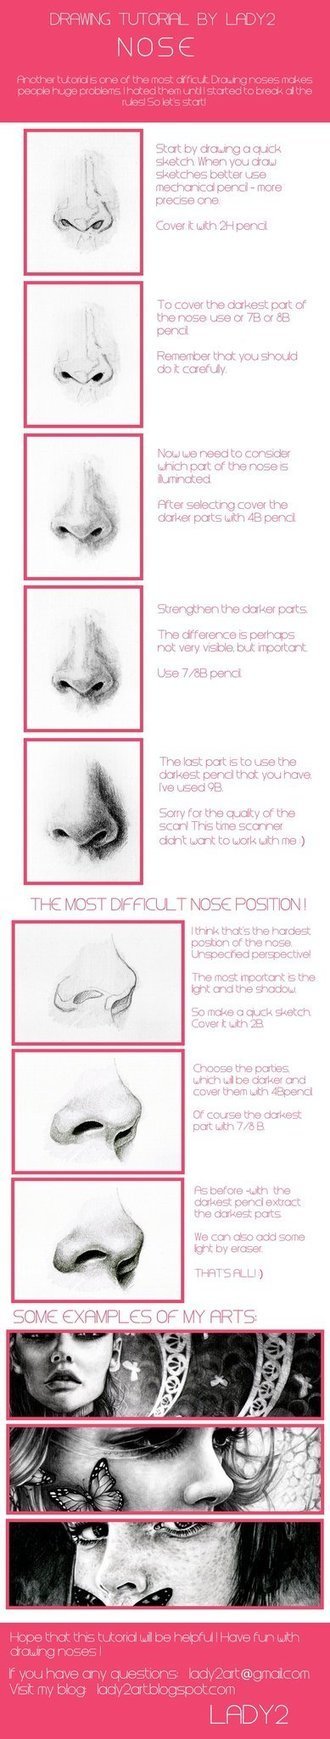 Nose Drawing Tutorial | Drawing and Painting Tutorials | Scoop.it